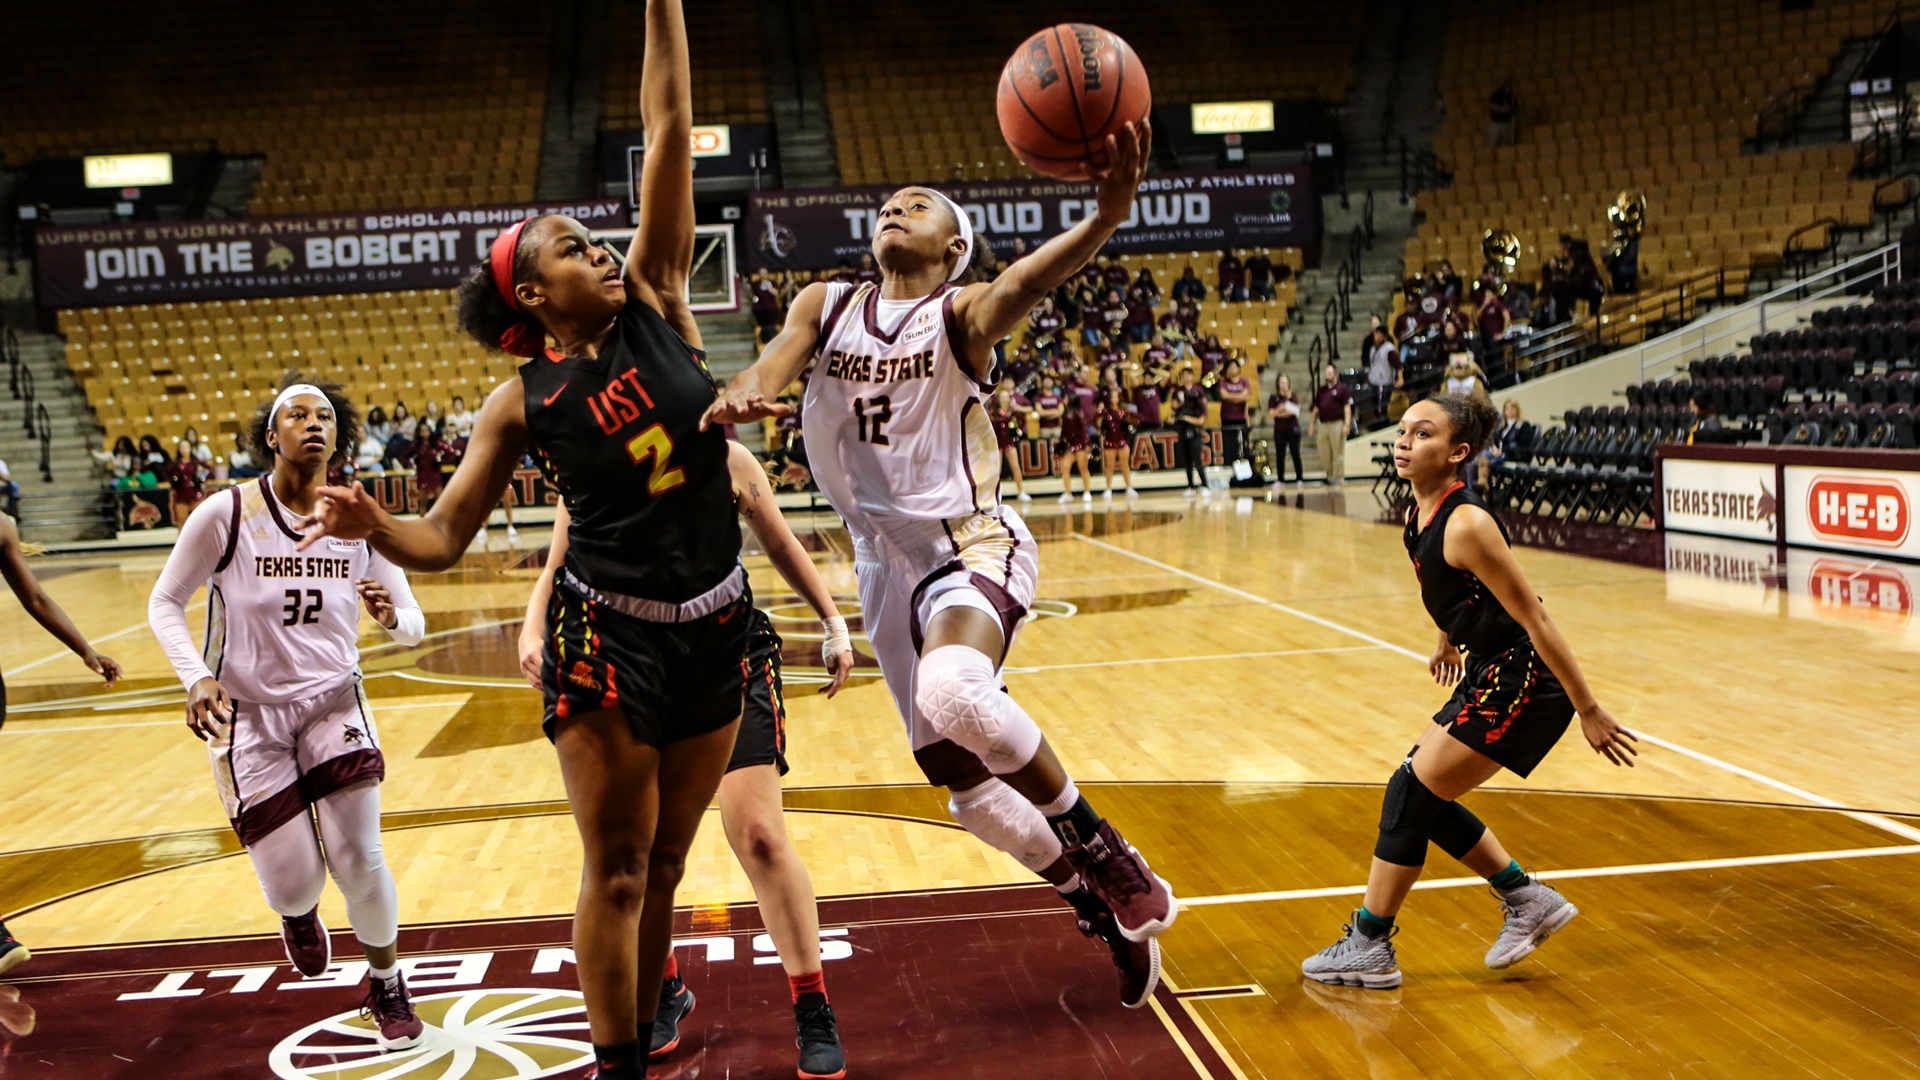 Dabrasia Baty drives to the basket for a layup against St. Thomas inside Strahan Arena.